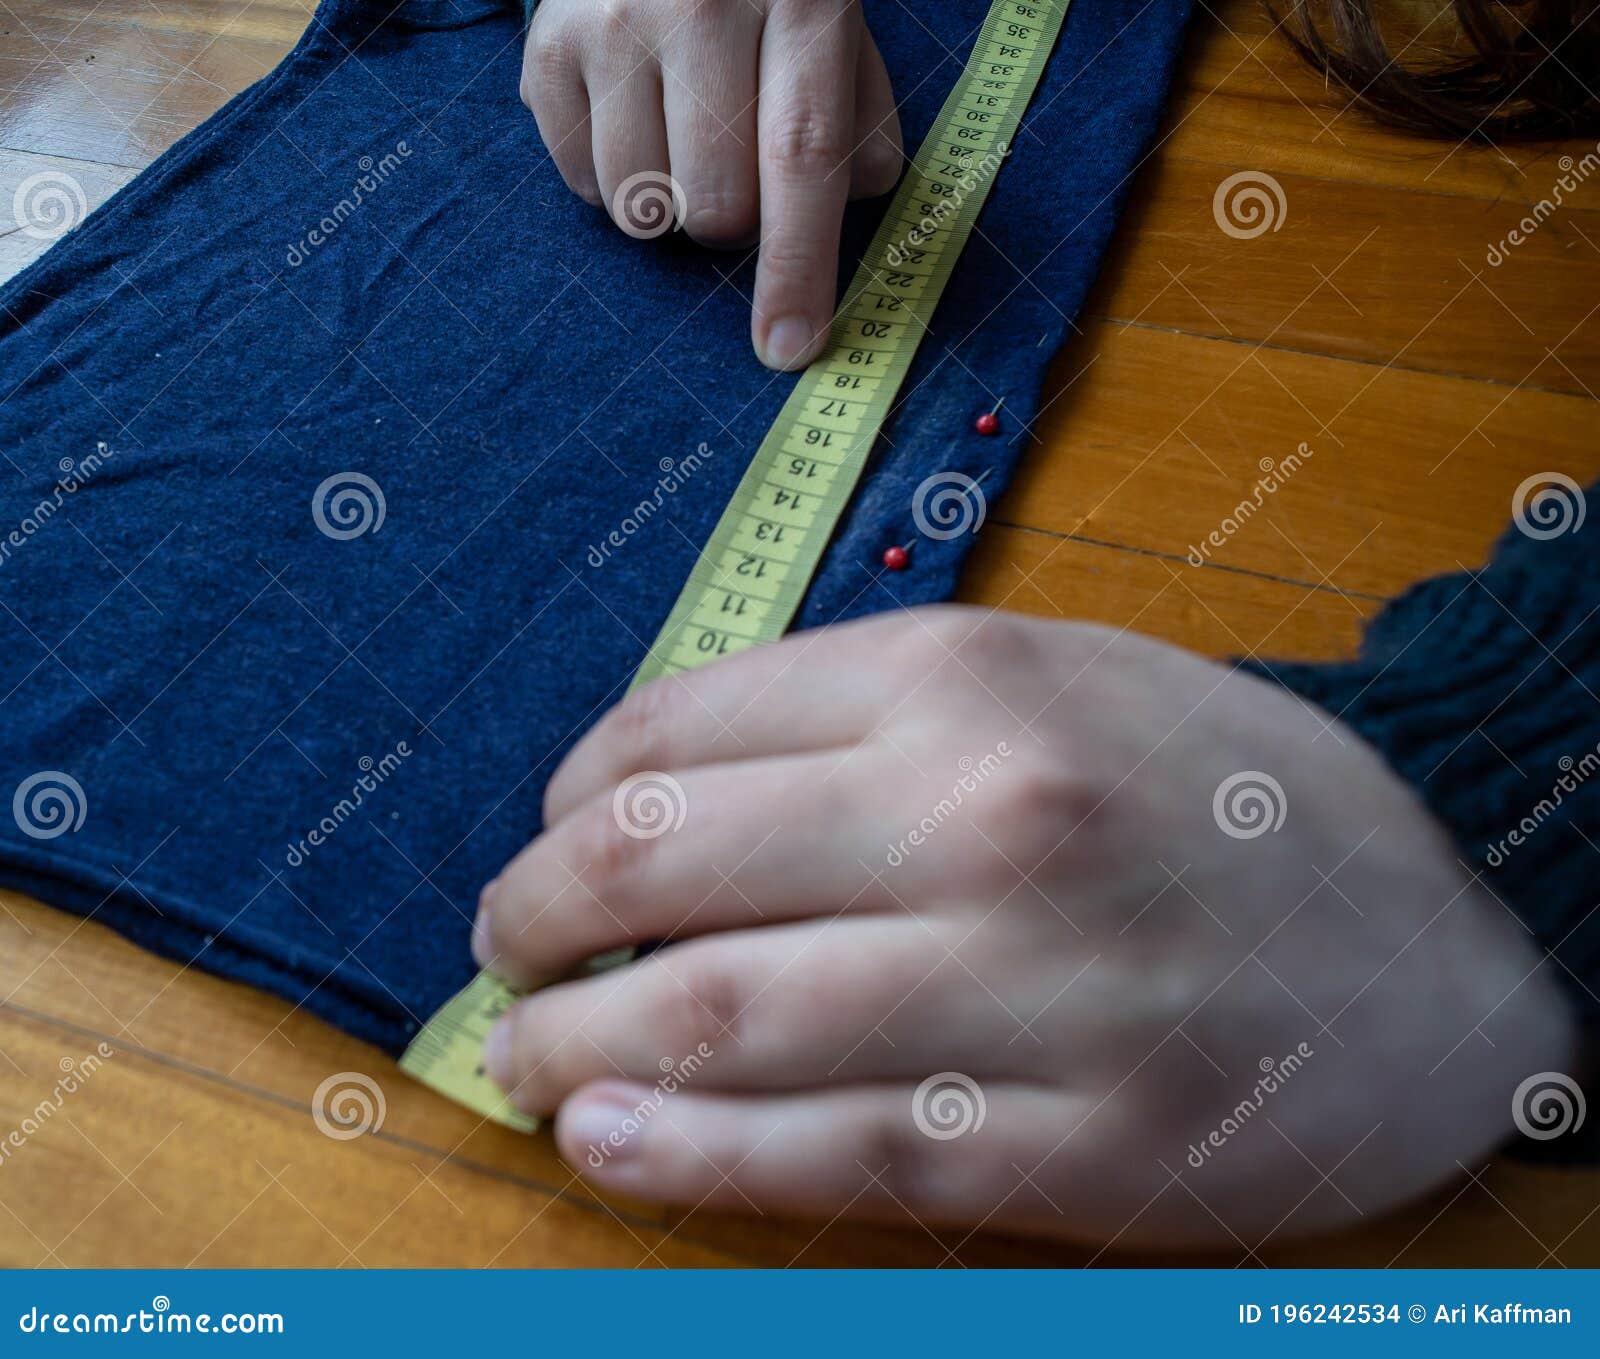 woman doing sewing work from home